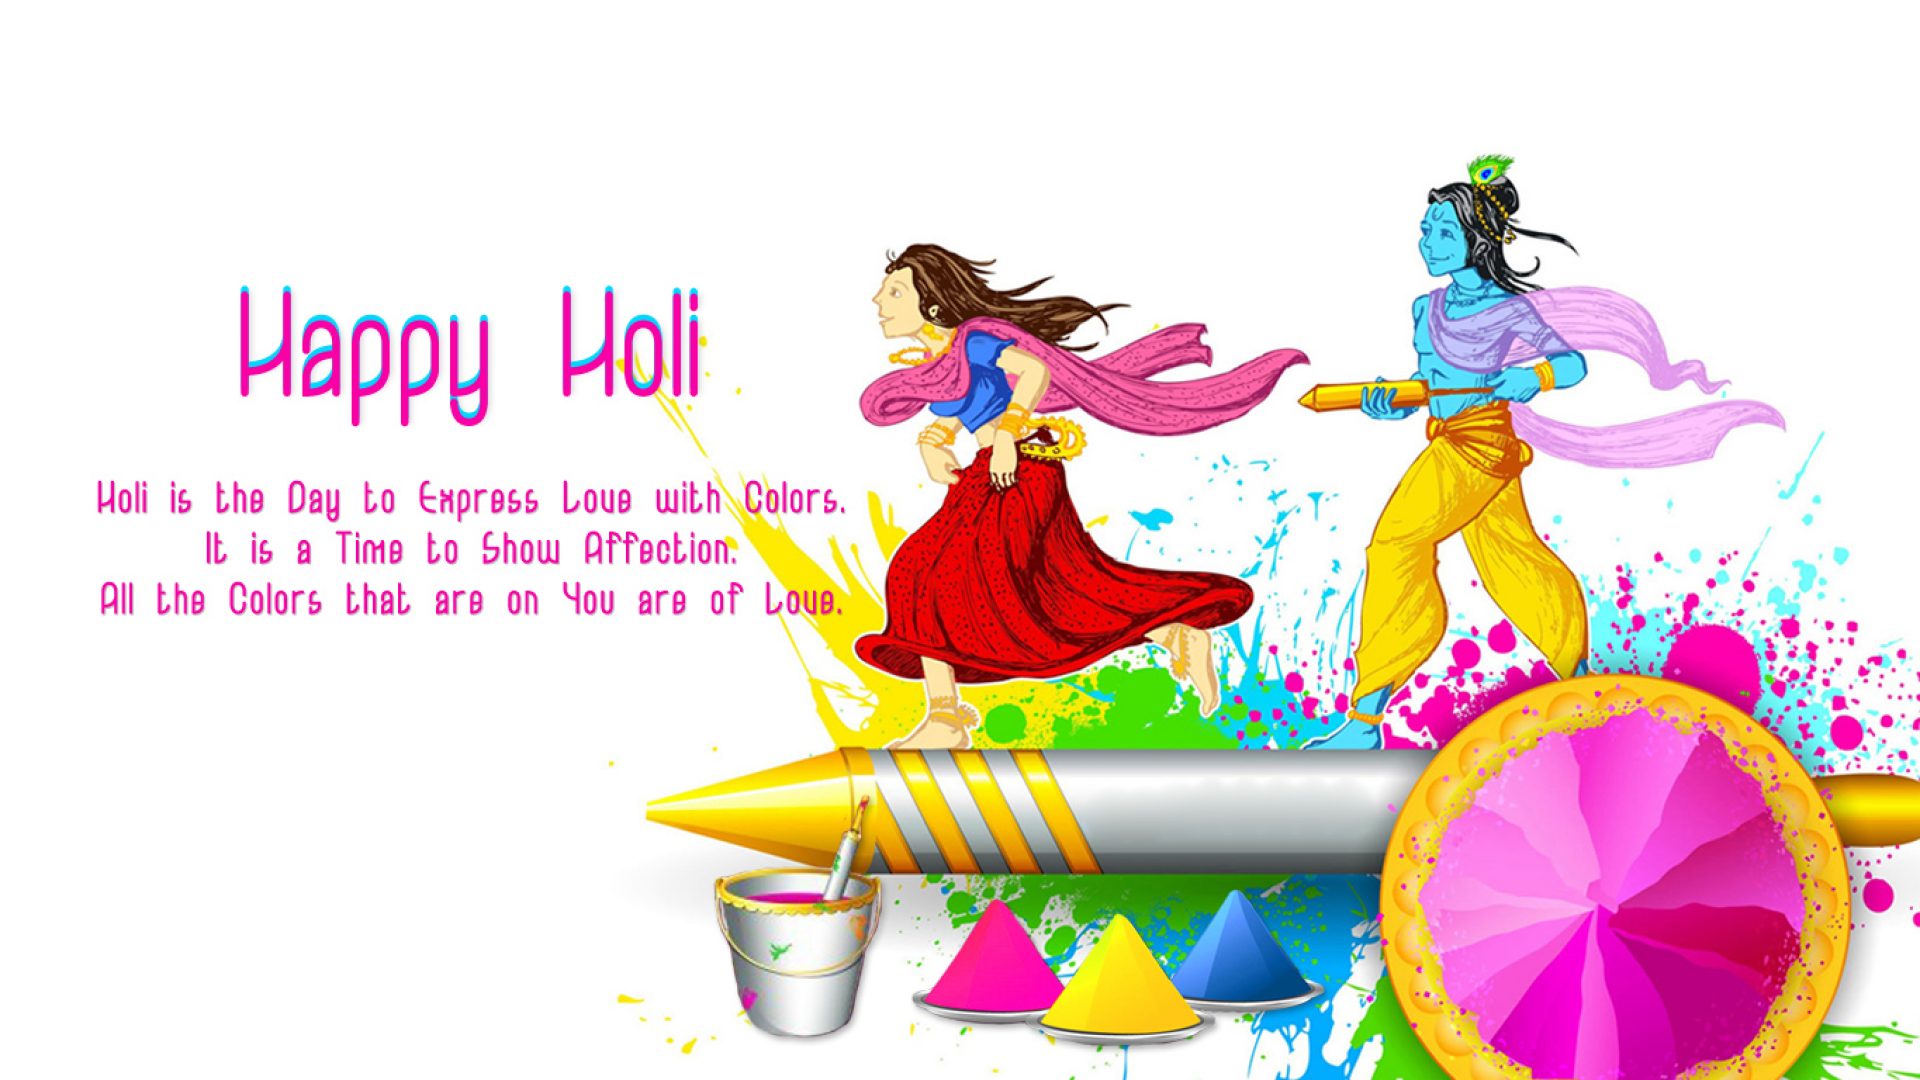 Happy Holi Wishes Images Free Download | Festivals